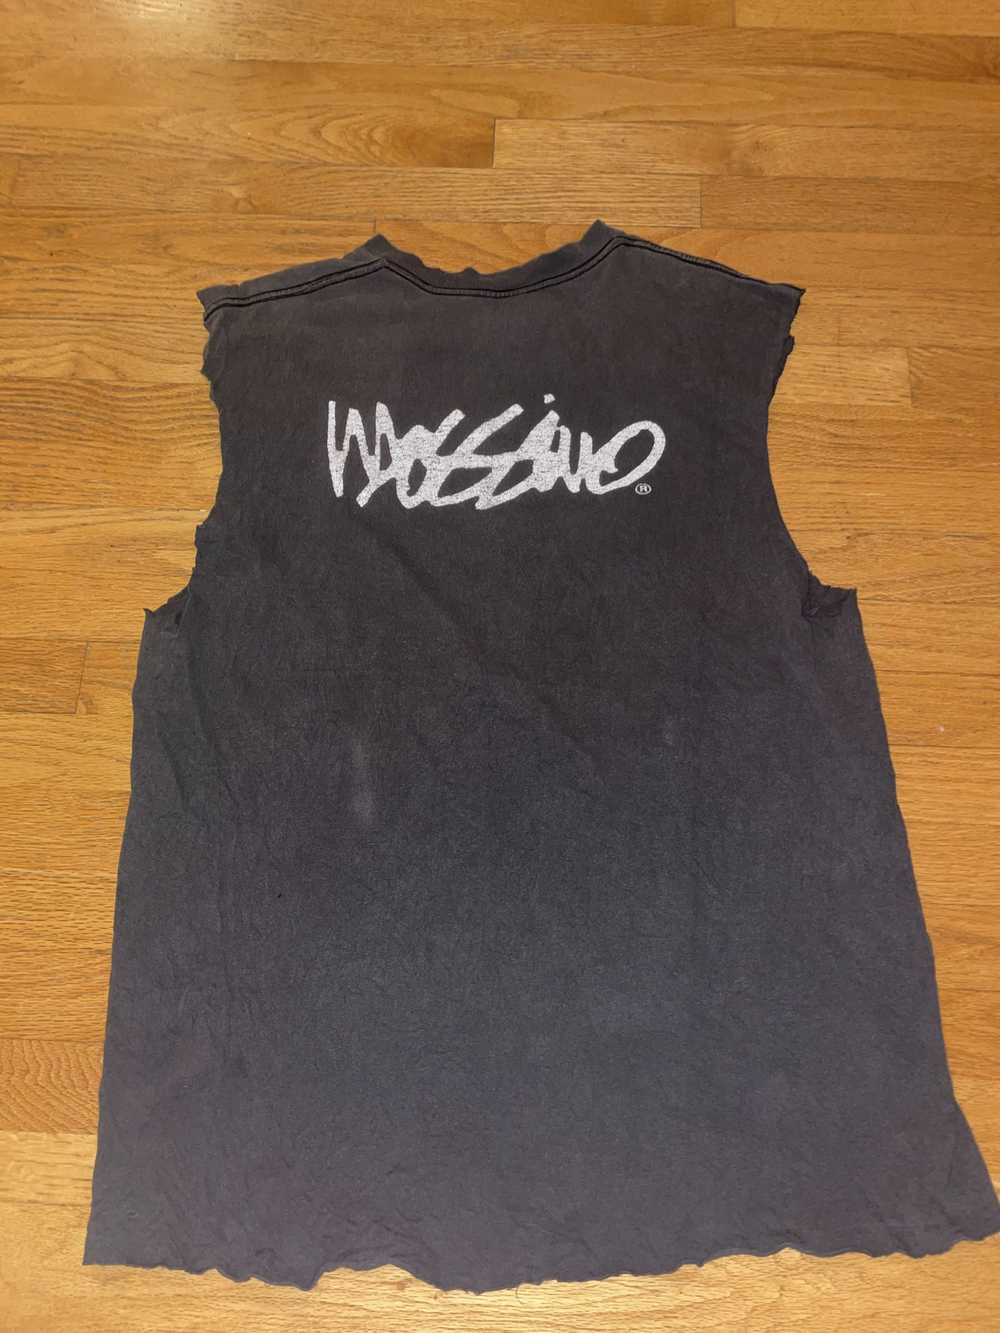 Vintage Late 80s/Early 90s Mossimo Chopped Tee - image 3